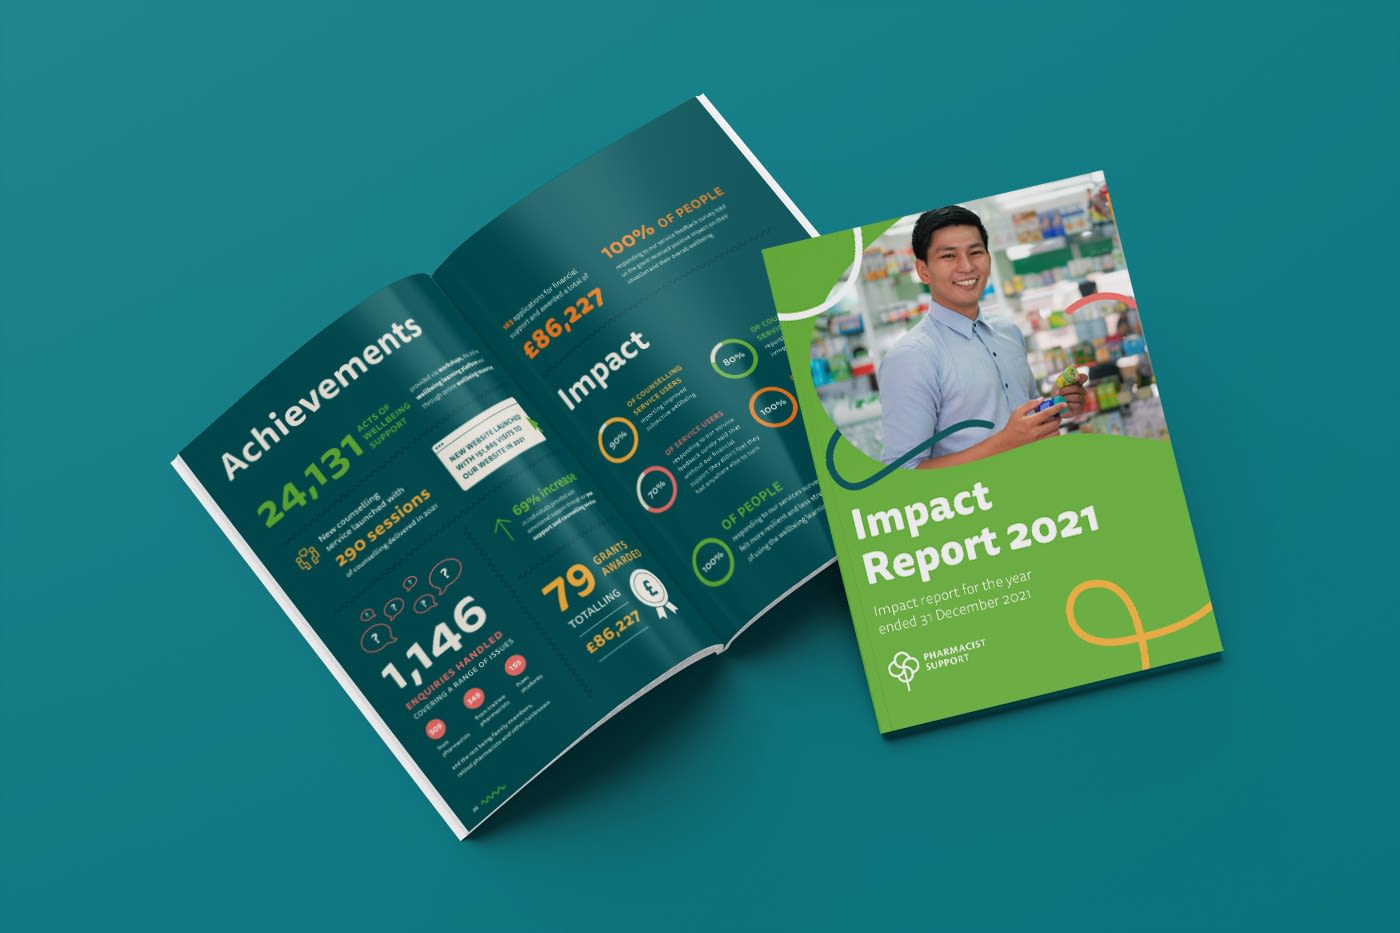 Pharmacist Support Impact Report front cover and double page spread.